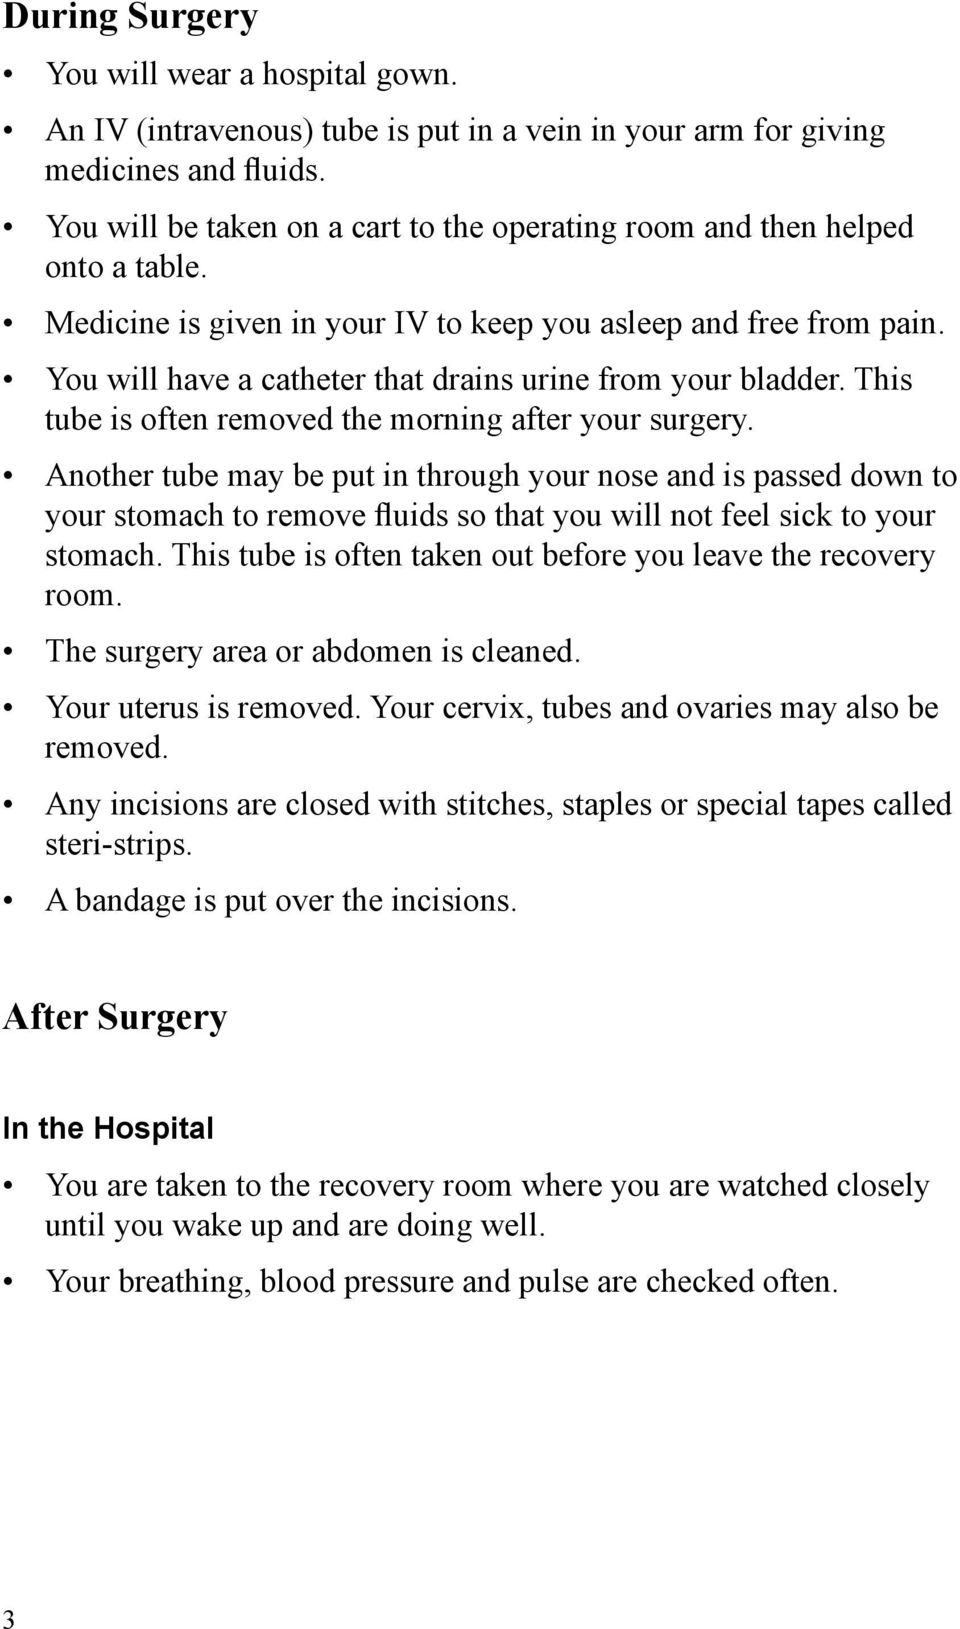 You will have a catheter that drains urine from your bladder. This tube is often removed the morning after your surgery.